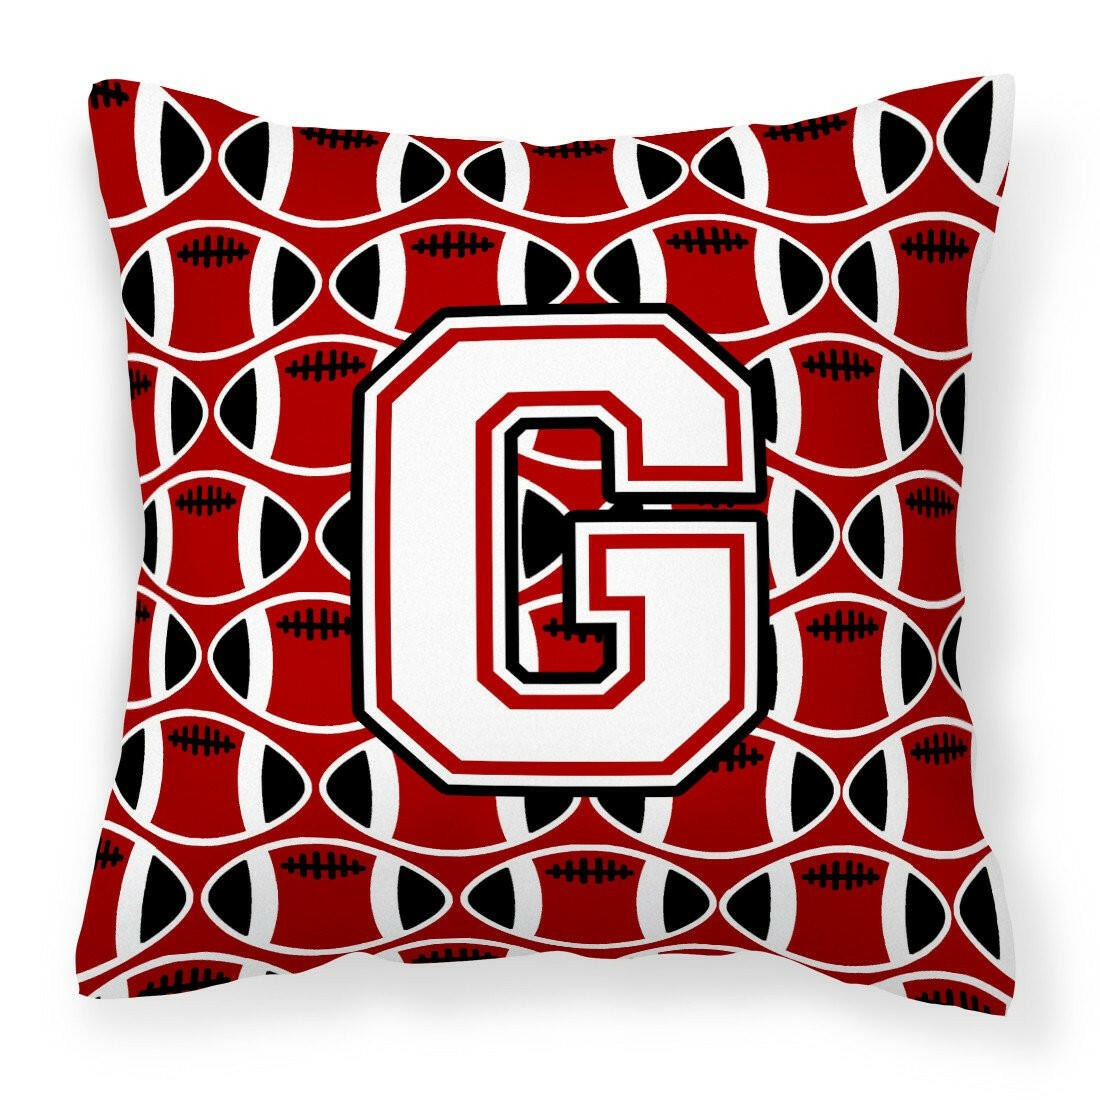 Letter G Football Cardinal and White Fabric Decorative Pillow CJ1082-GPW1414 by Caroline's Treasures